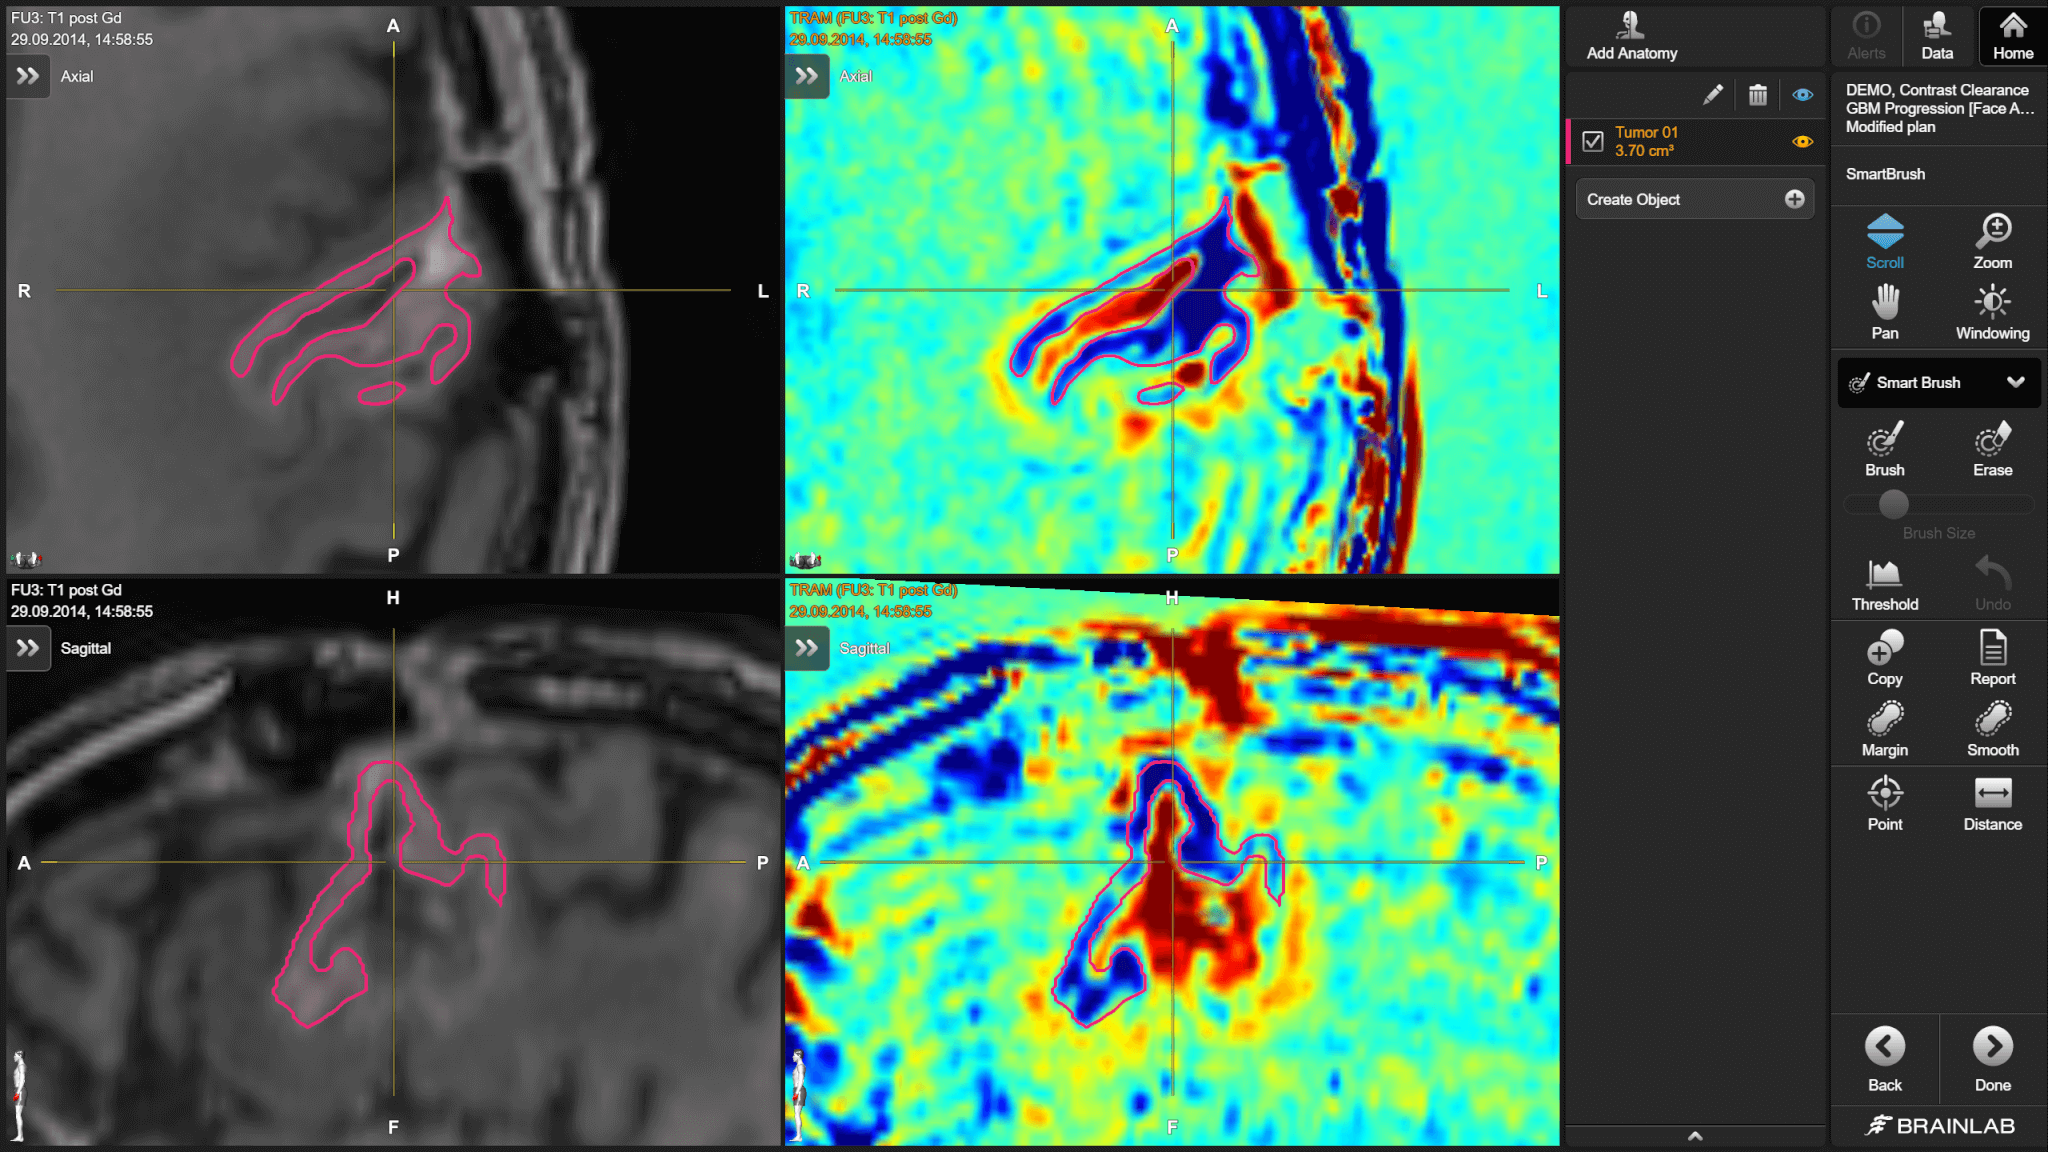 Screenshot: Methodology for Contrast Clearance Analysis from Dual MRI Series